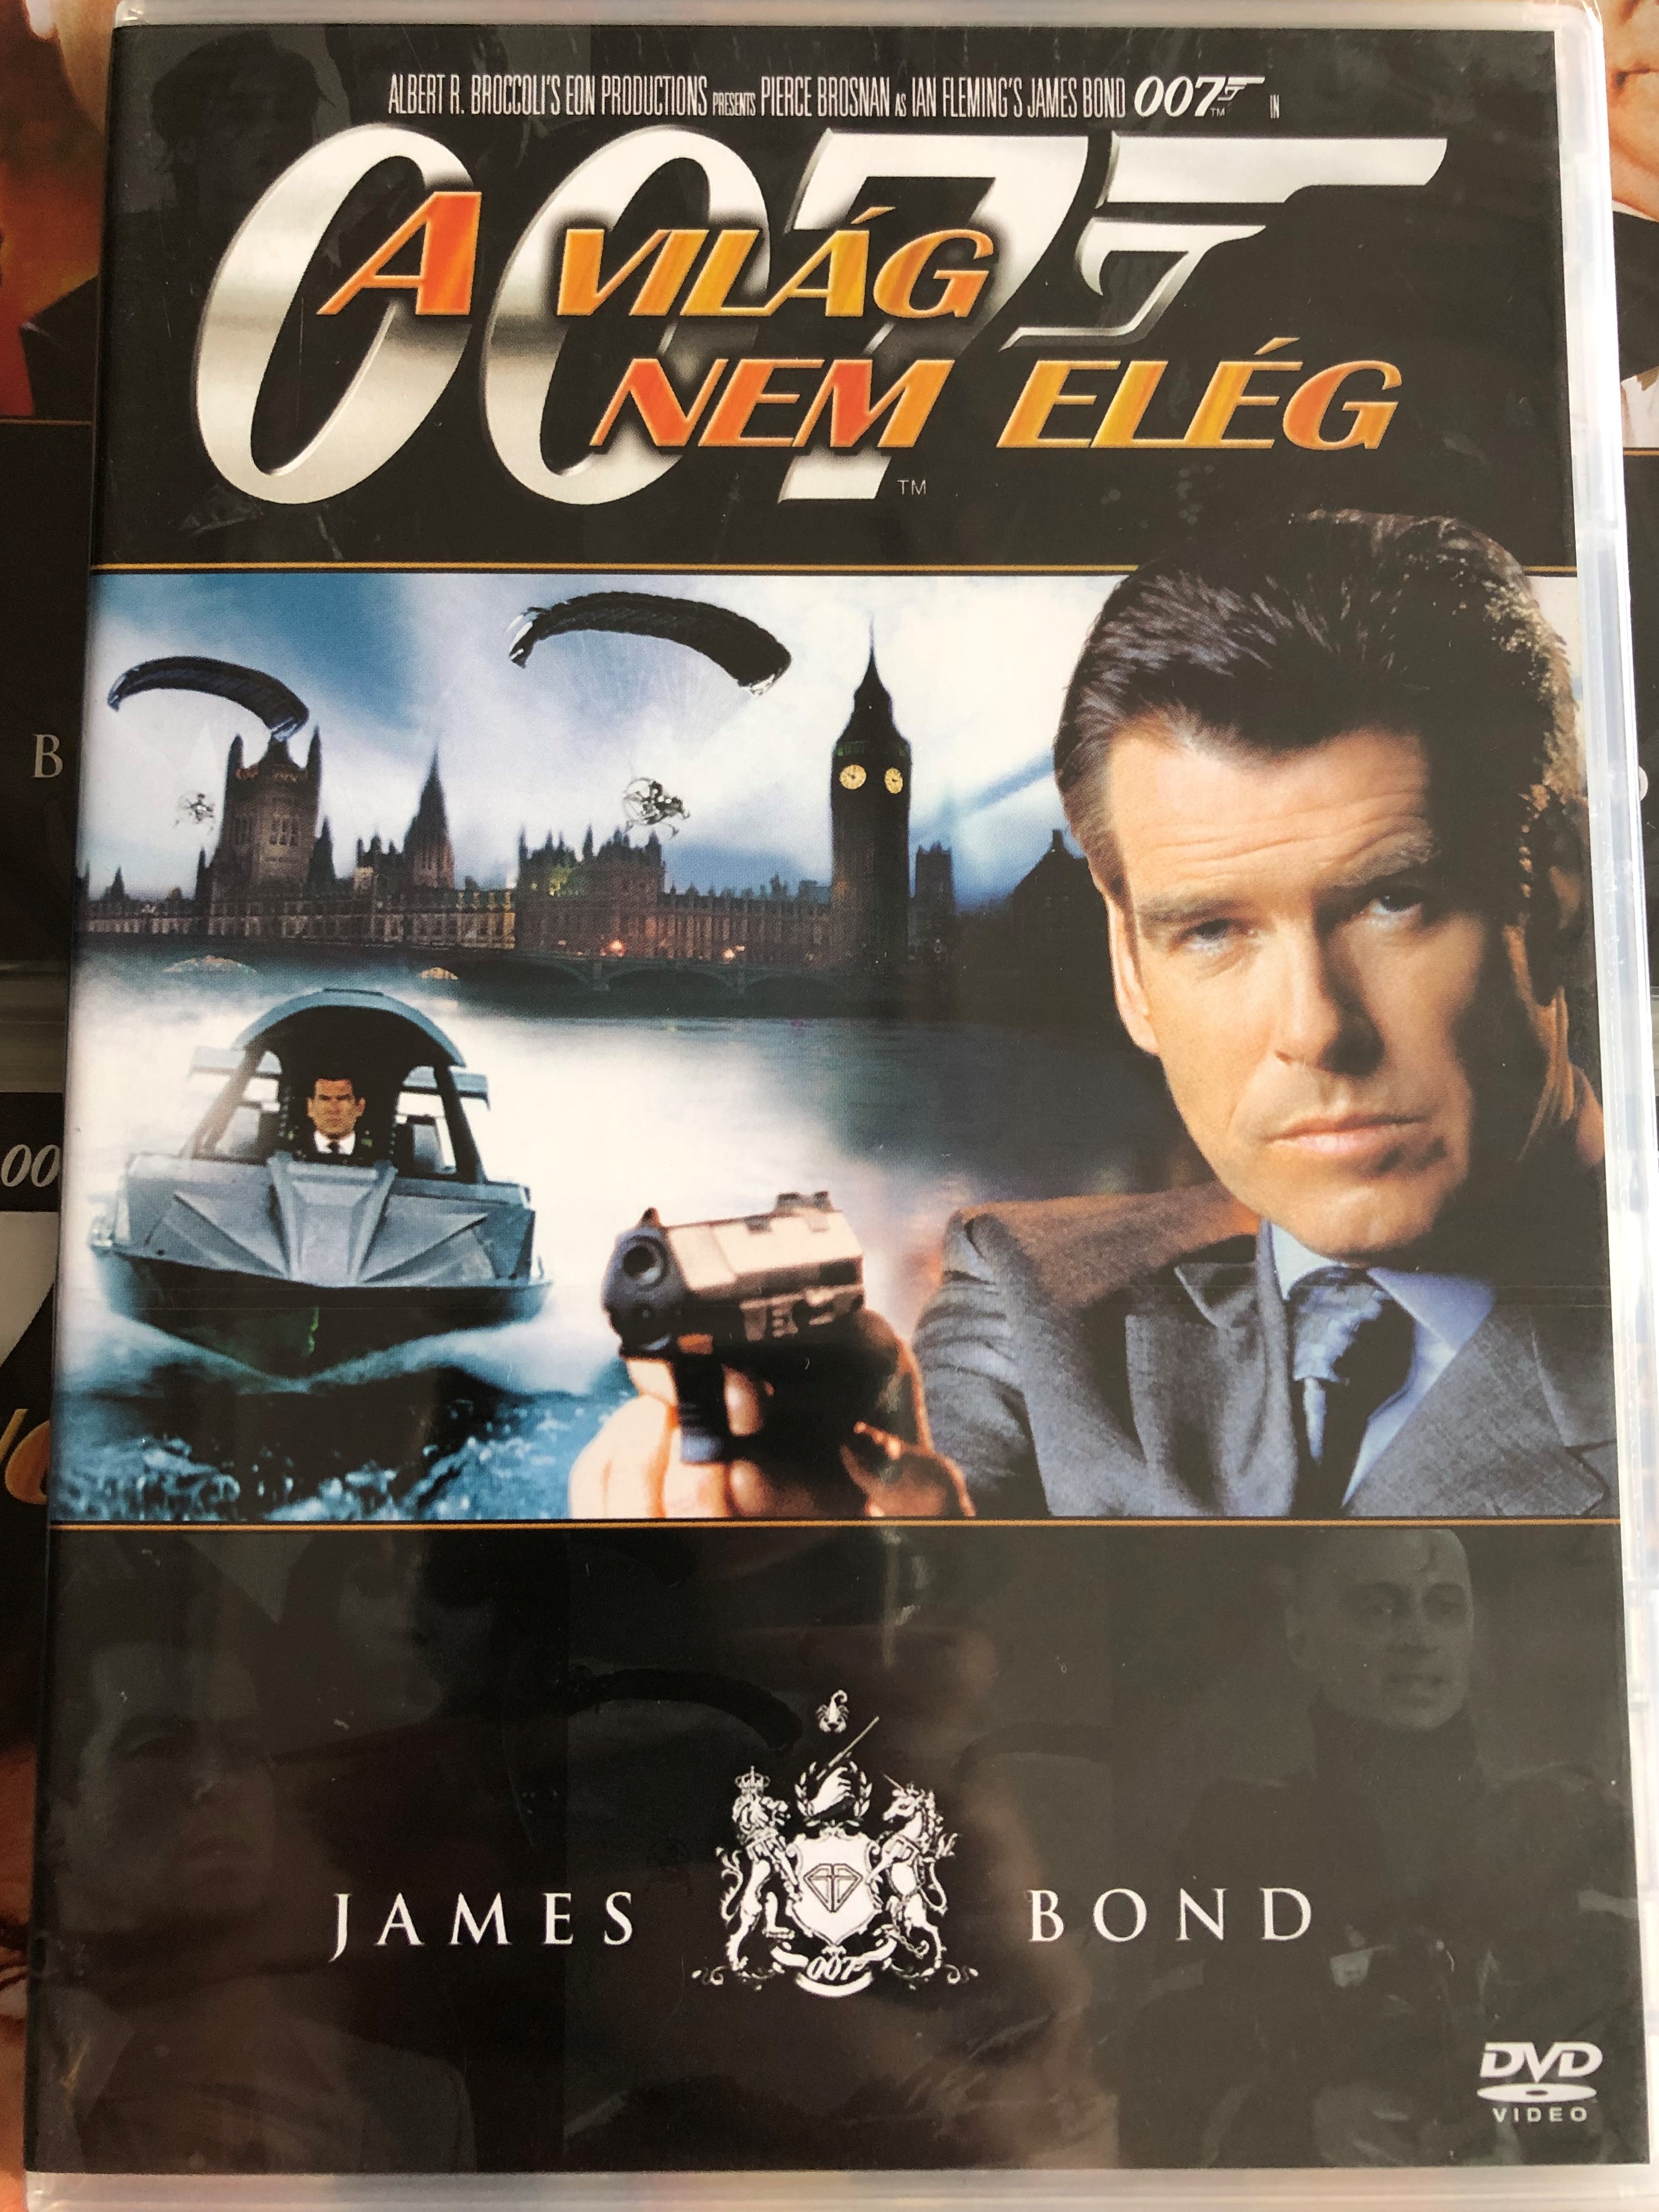 James Bond 007 - The World is not Enough 1.JPG